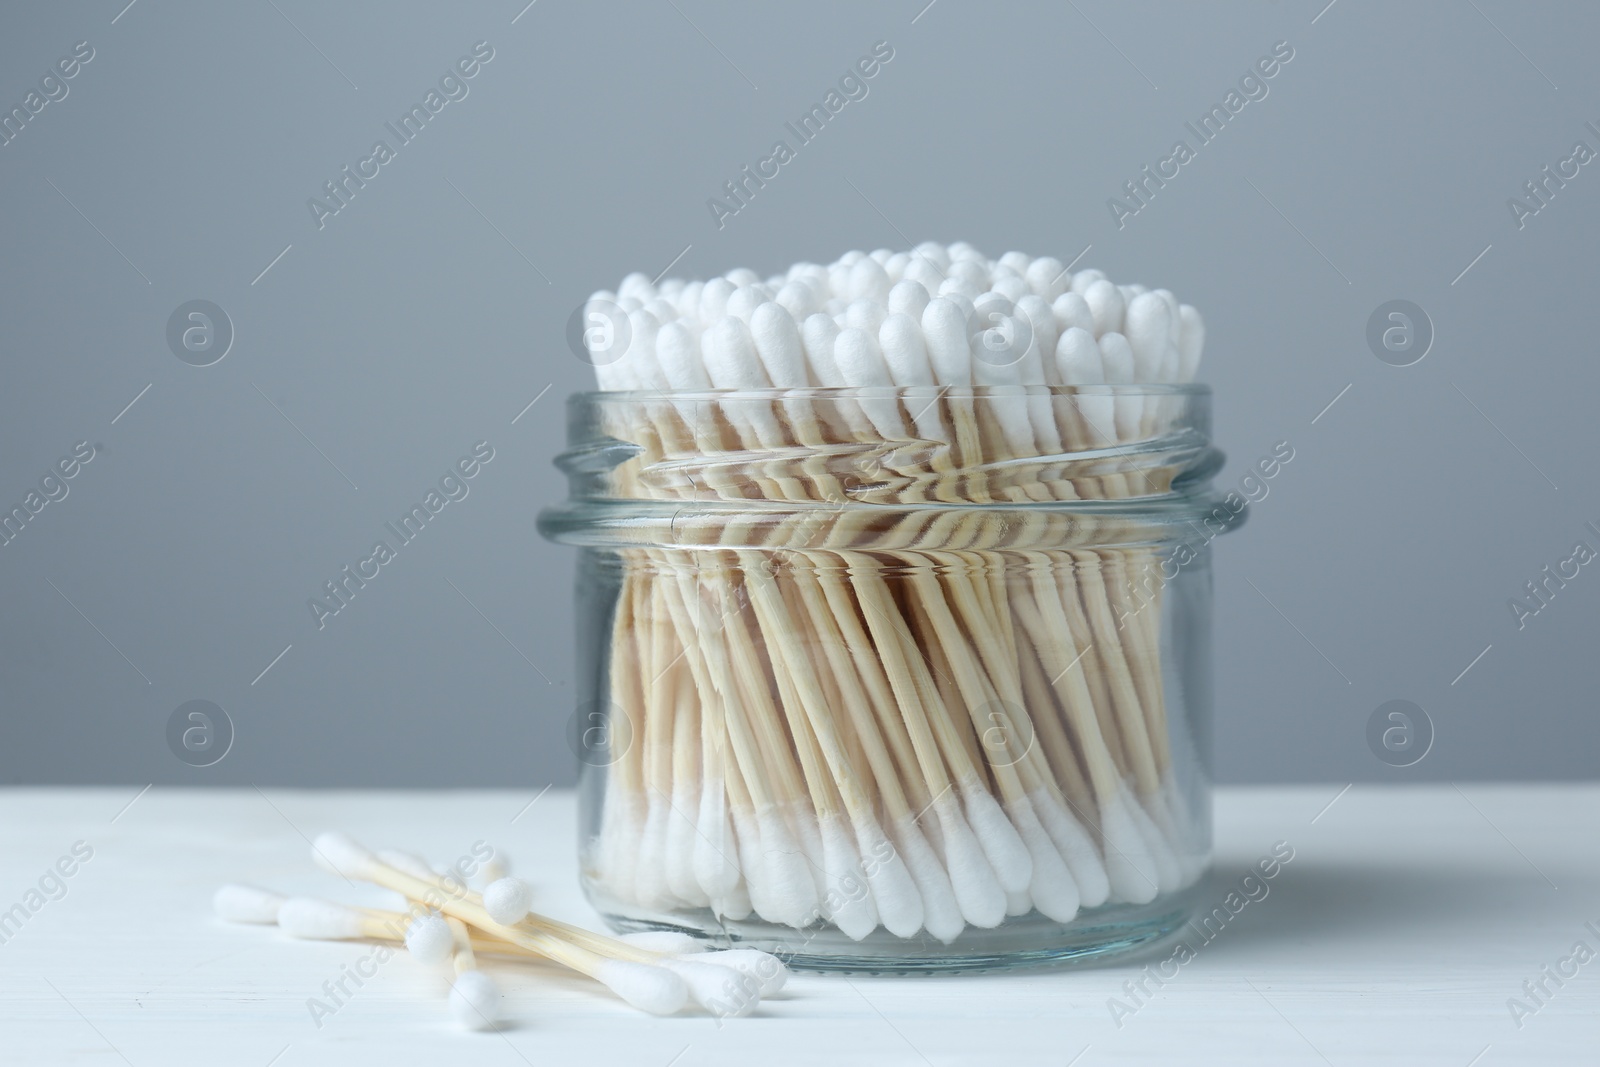 Photo of Many cotton buds on white wooden table against grey background